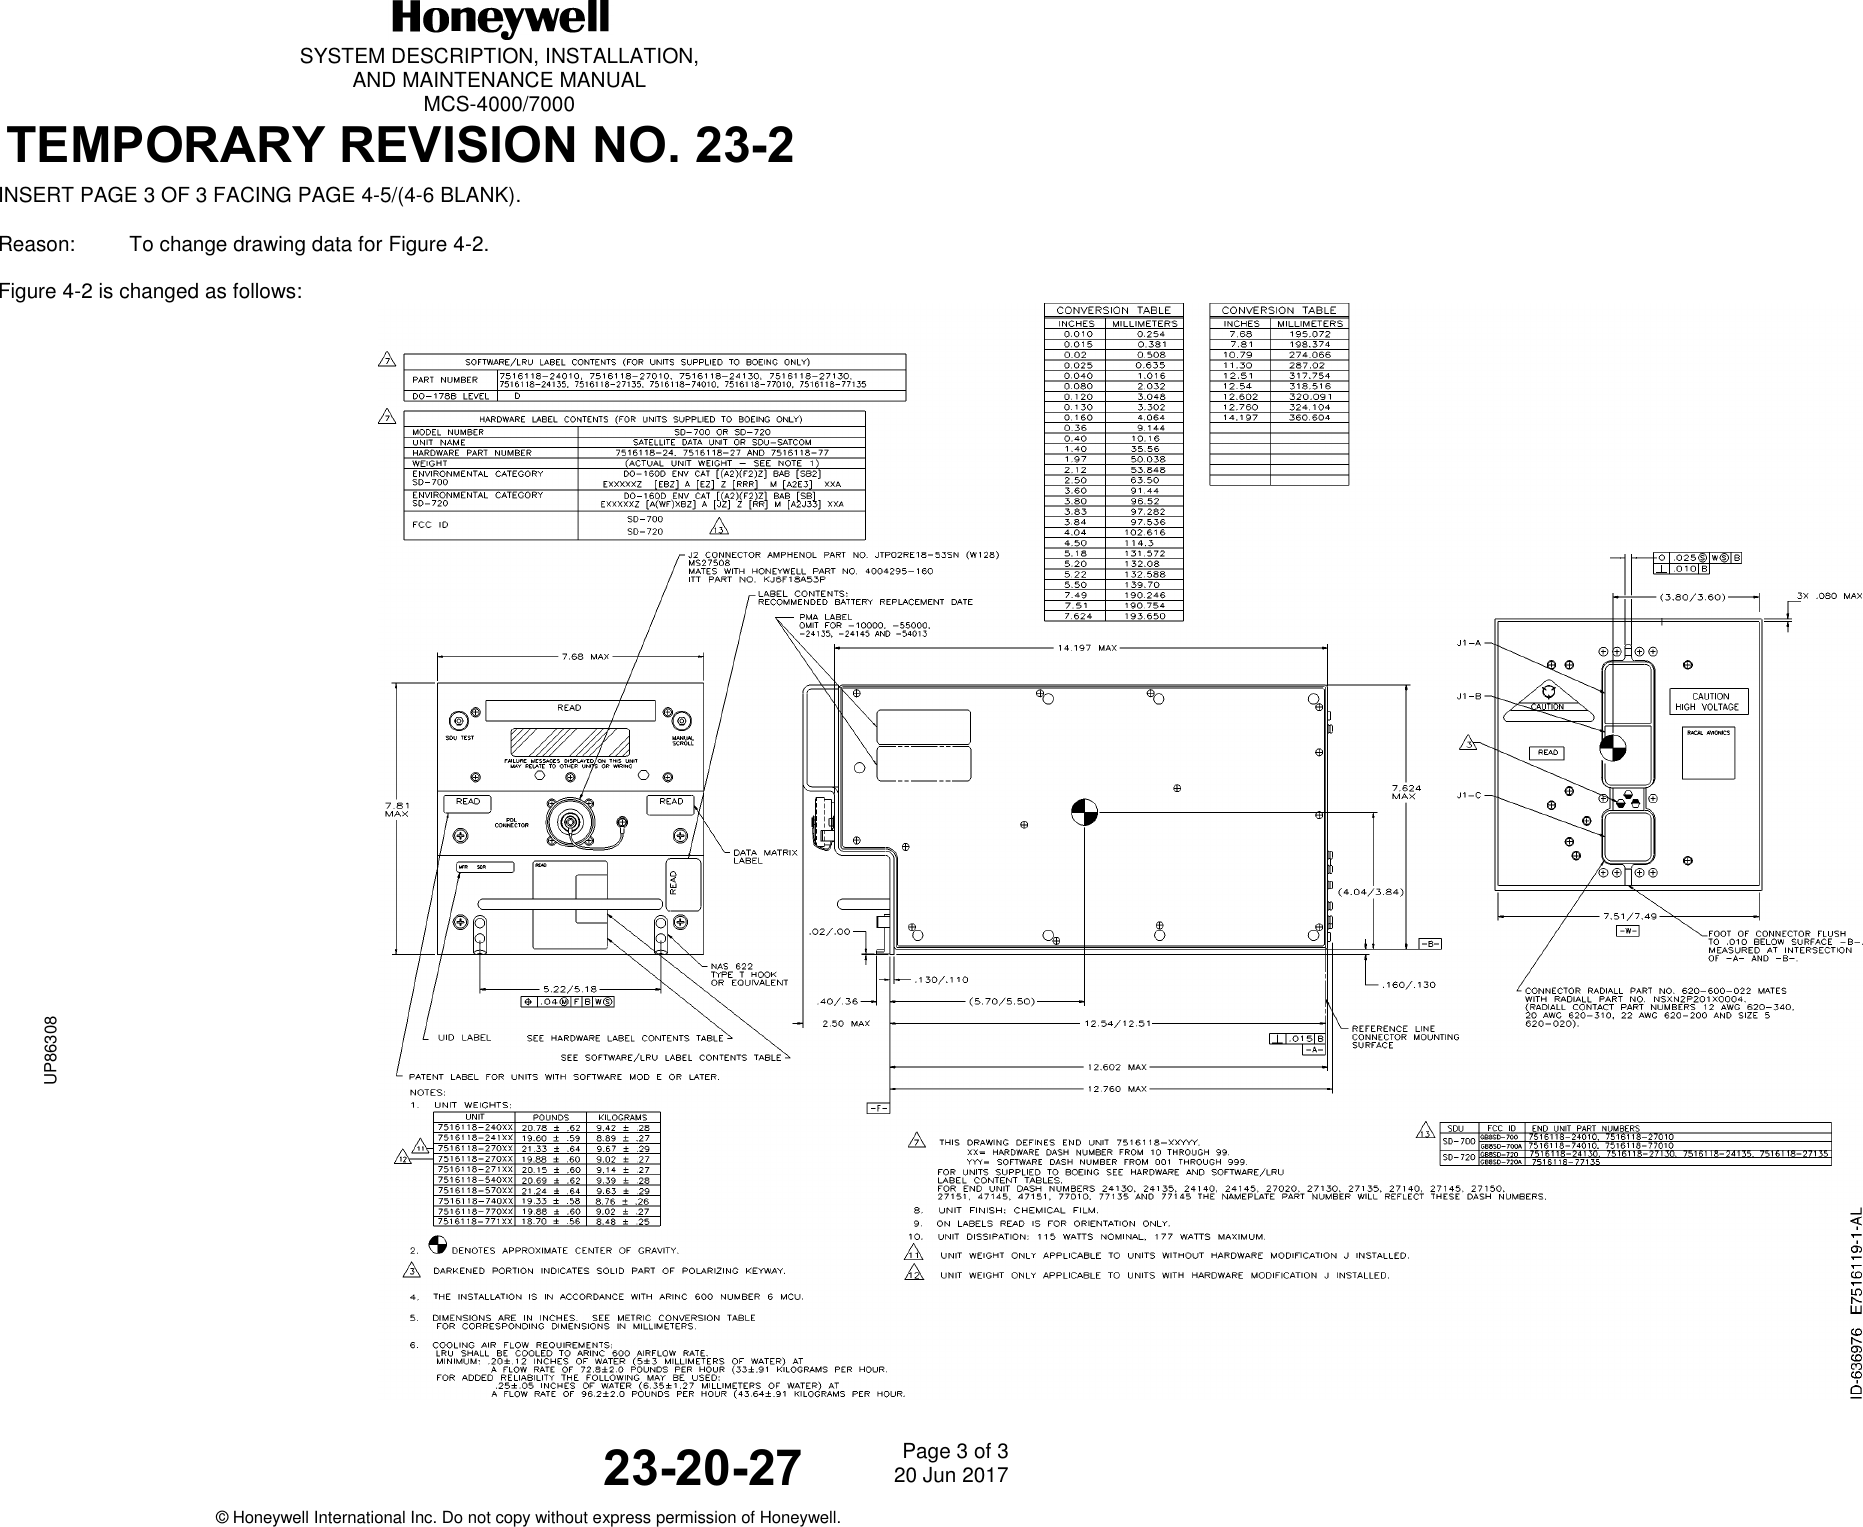   SYSTEM DESCRIPTION, INSTALLATION, AND MAINTENANCE MANUAL MCS-4000/7000  TEMPORARY REVISION NO. 23-2     23-20-27 Page 3 of 3 20 Jun 2017                                                  © Honeywell International Inc. Do not copy without express permission of Honeywell. INSERT PAGE 3 OF 3 FACING PAGE 4-5/(4-6 BLANK). Reason:  To change drawing data for Figure 4-2.  Figure 4-2 is changed as follows:  RELEASED FOR THE EXCLUSIVE USE BY: HONEYWELL INTERNATIONALUP86308